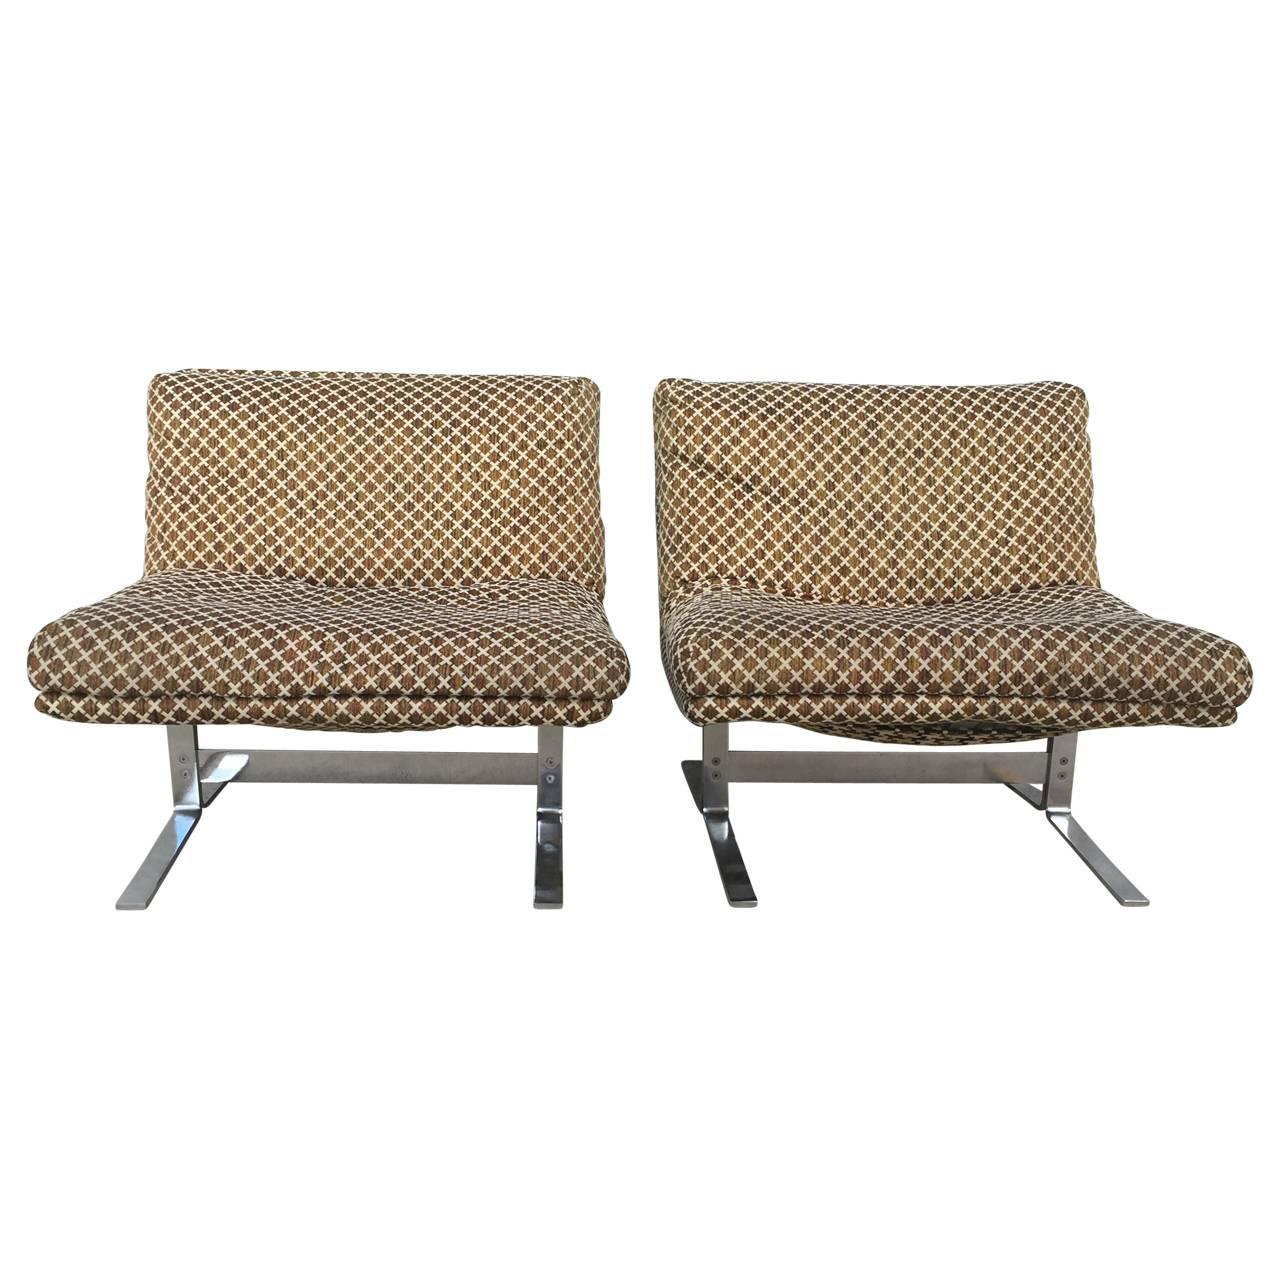 Pair of Midcentury Italian lounge chairs with original fabric and polished steel frame. Super comfortable high quality chairs.